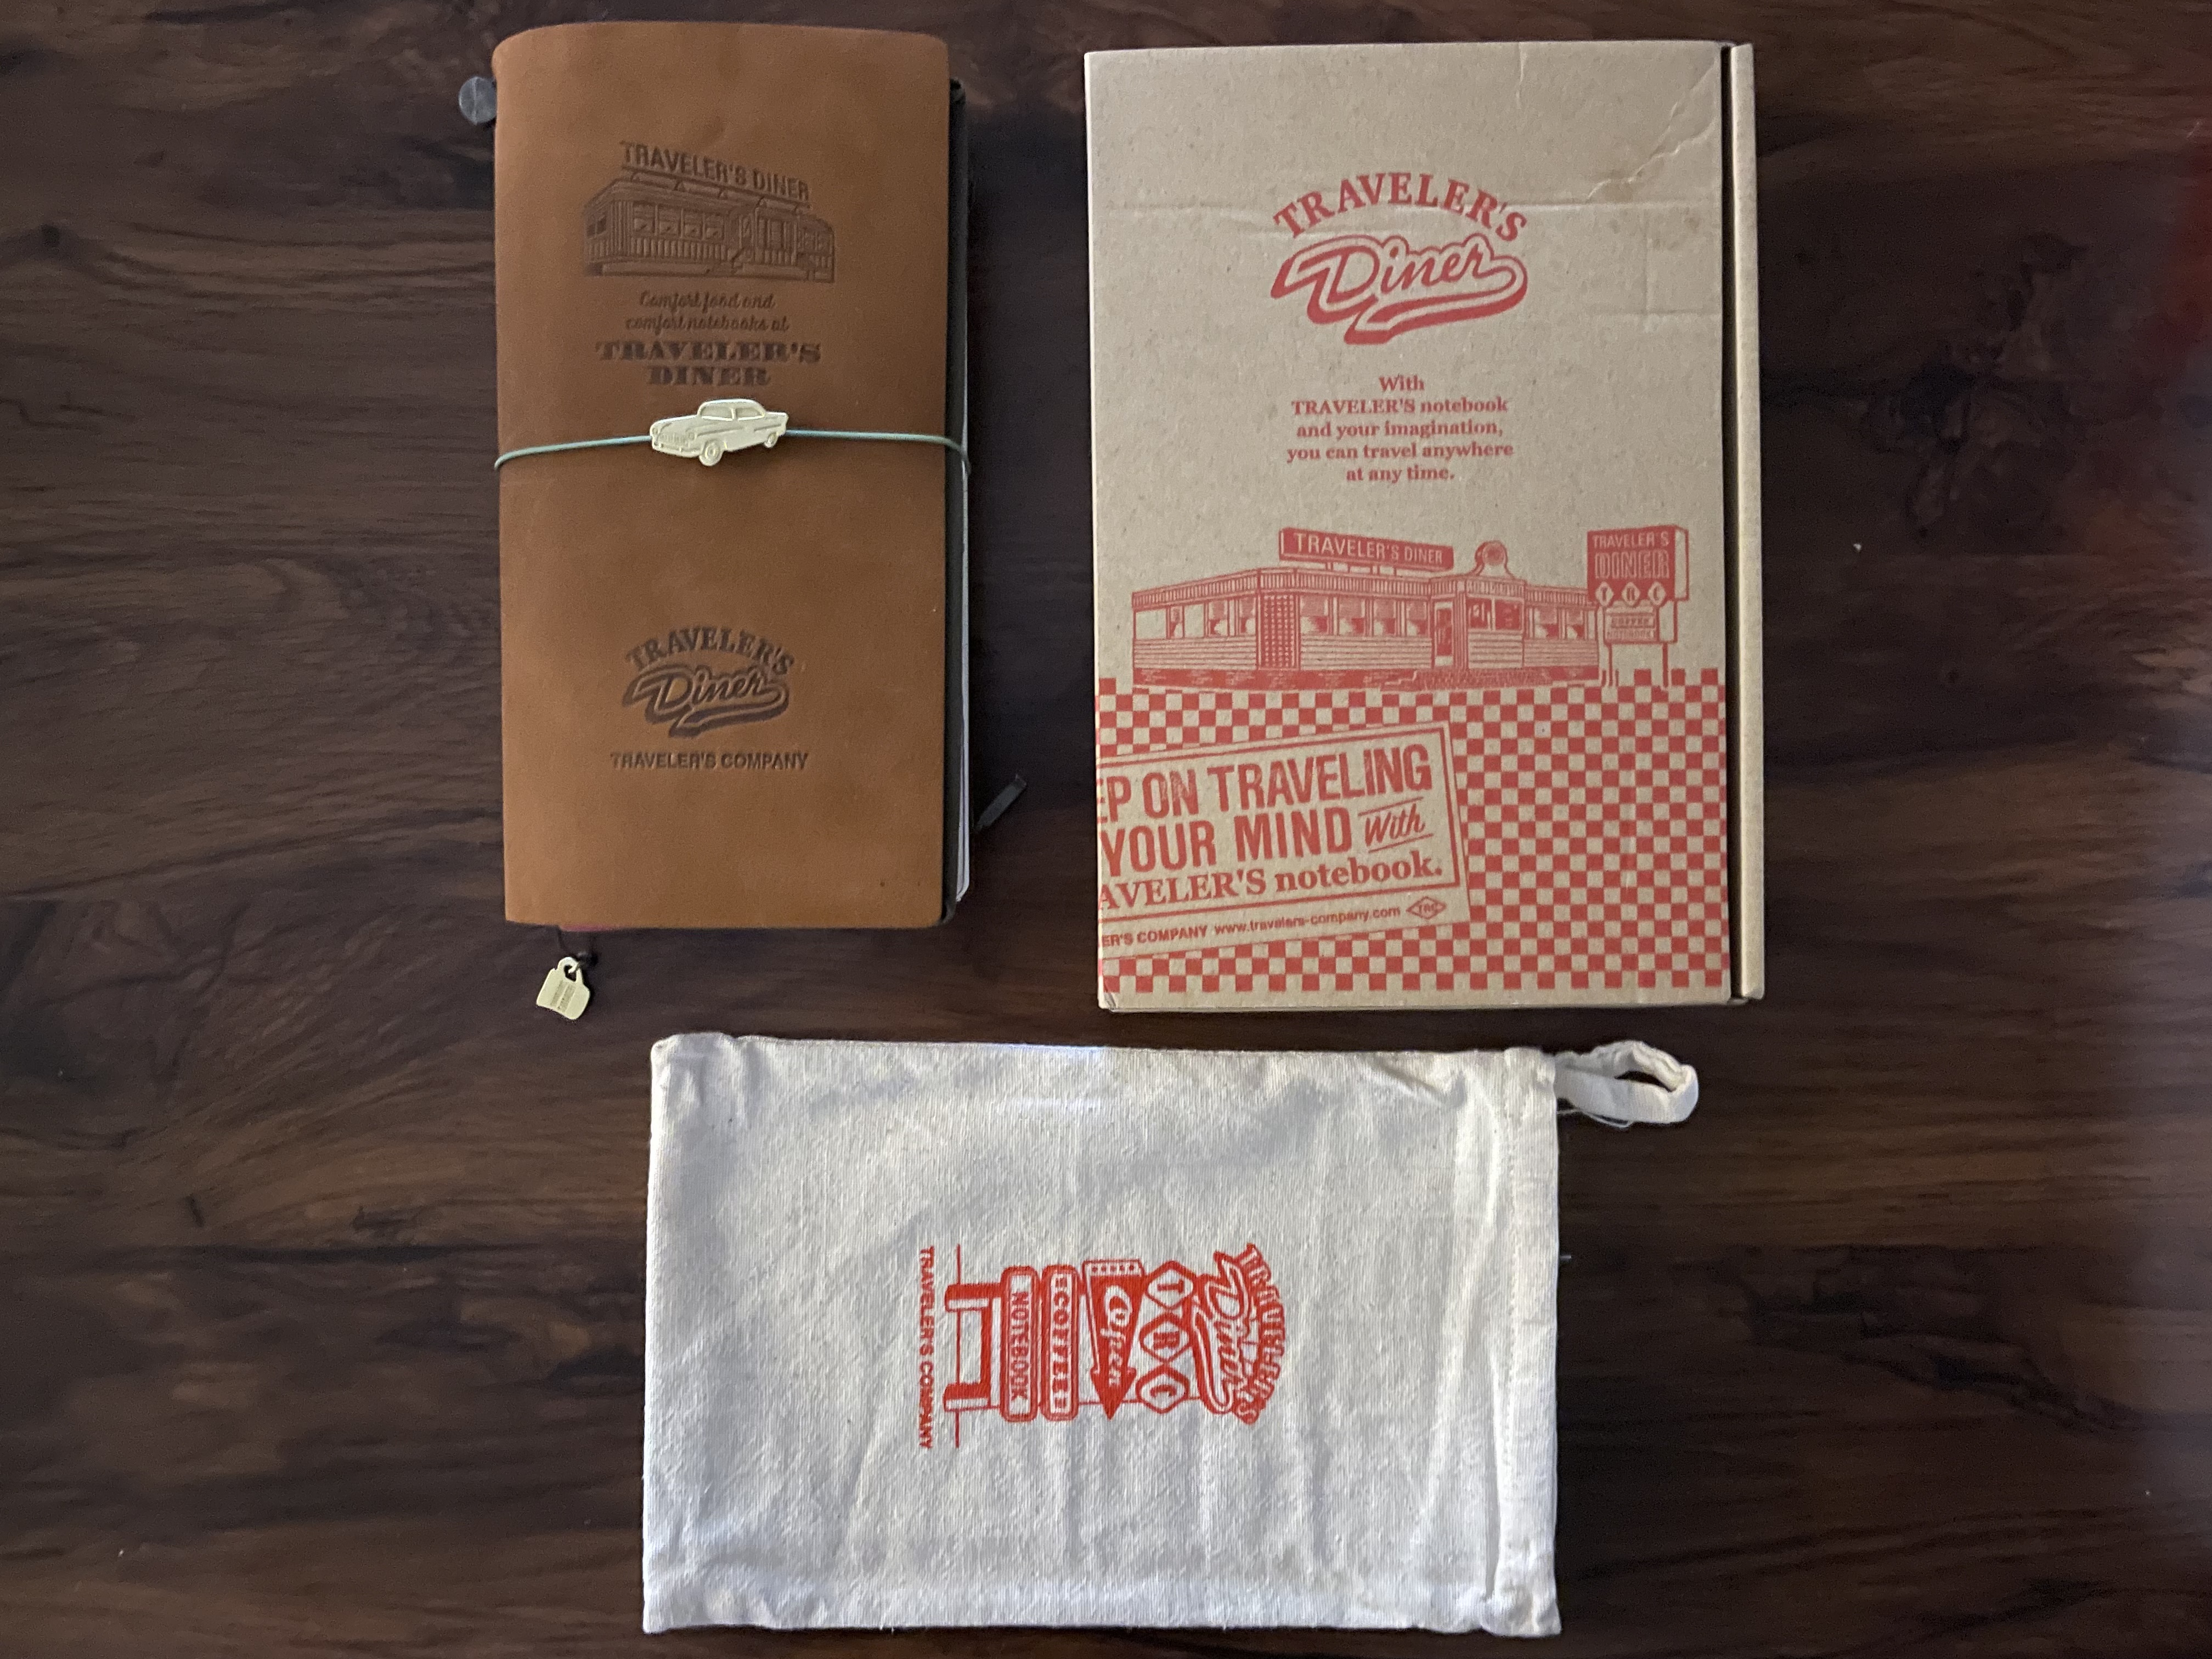 another picture of the diner traveler's notebook, this time with the two aforementioned charms attached to it: the car charm is attached to the elastic, while the coffee charm is attached to the bookmark string